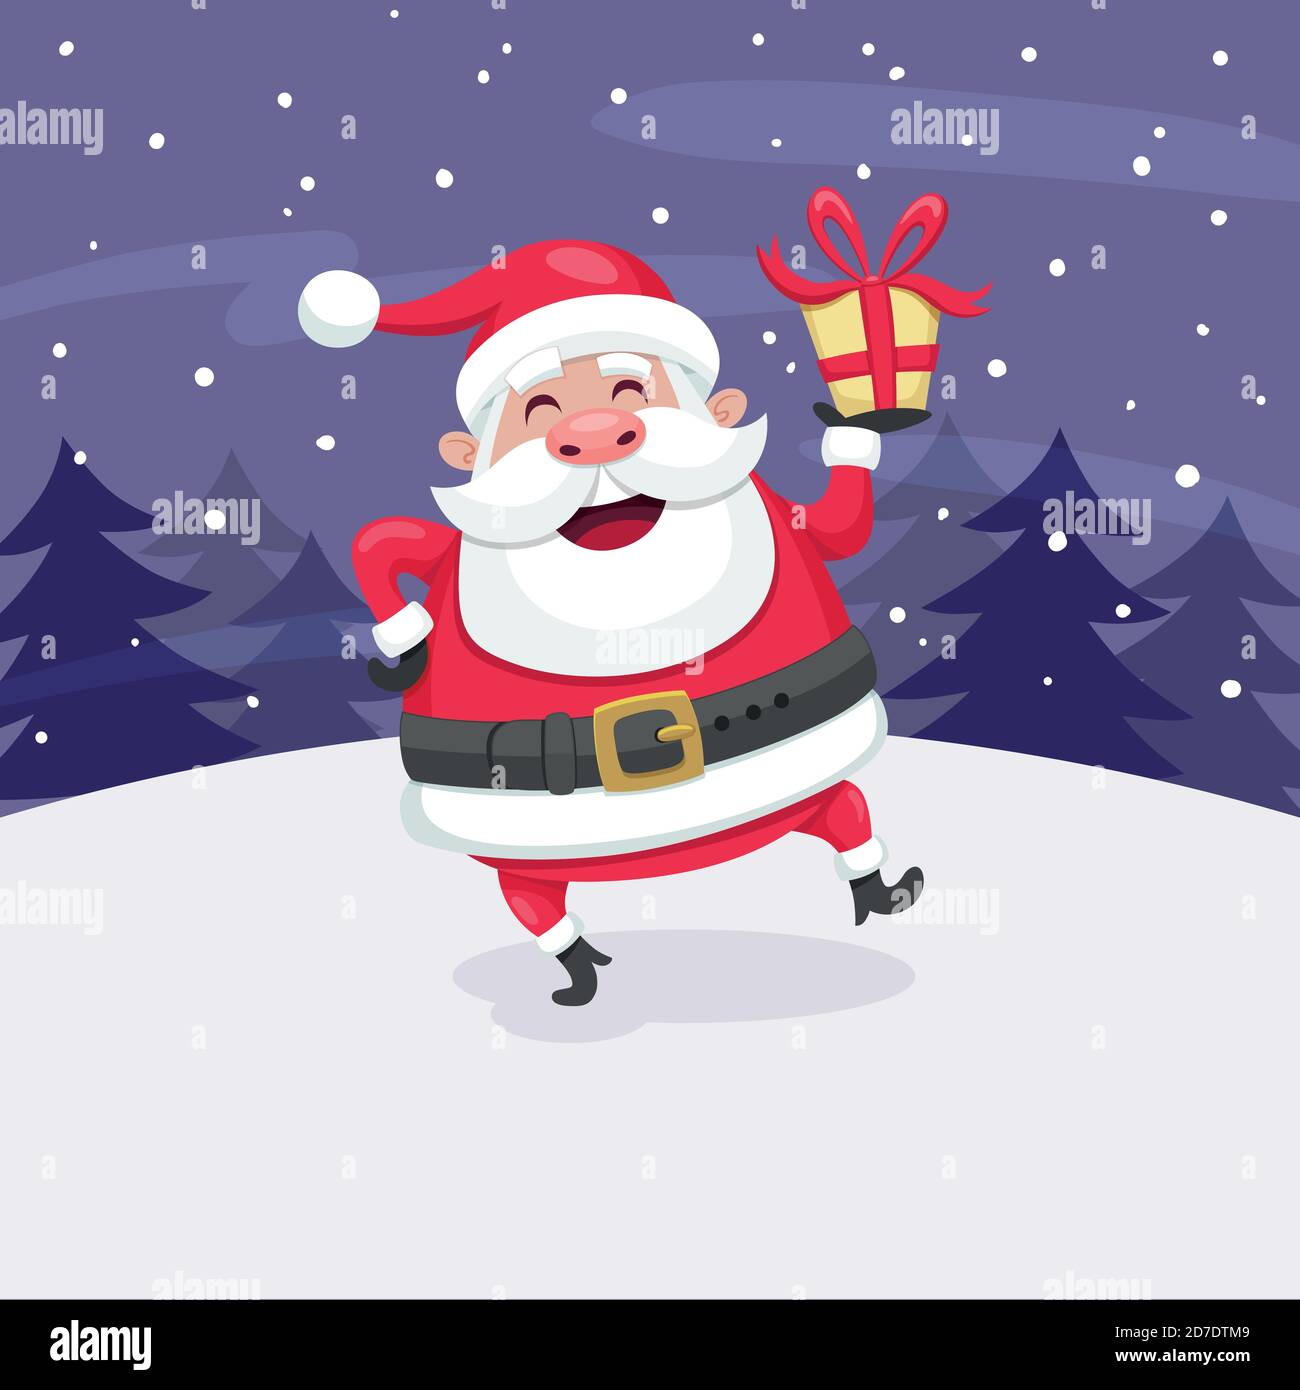 Christmas greeting card. Santa Claus dancing in the snow and holding a present. Vector illustration. Stock Vector